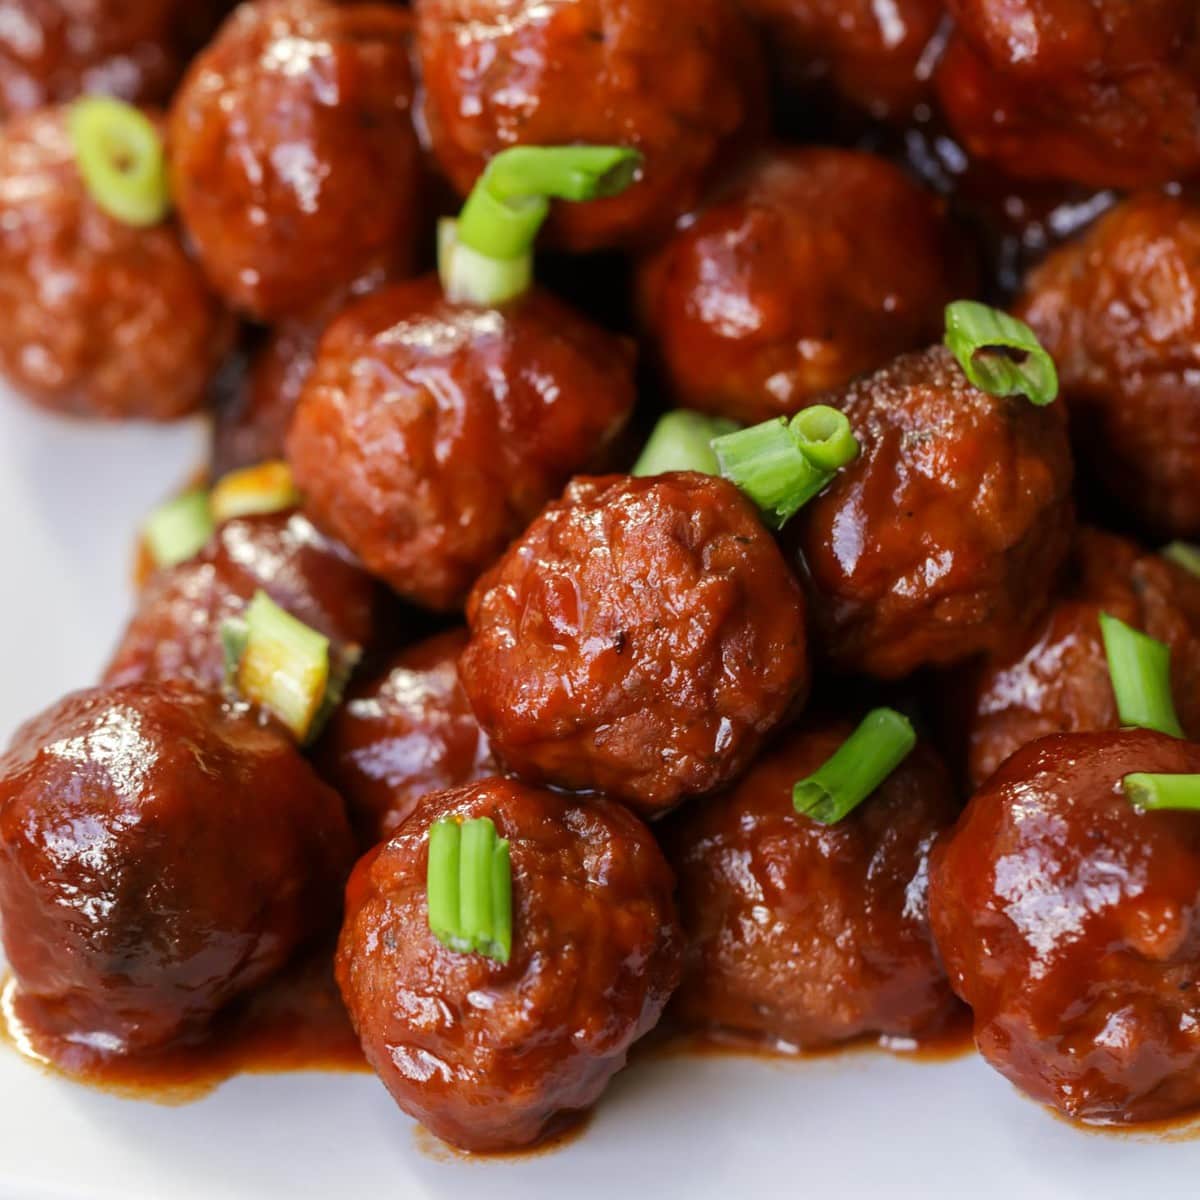 Thanksgiving appetizers - grape jelly meatballs topped with green onions.